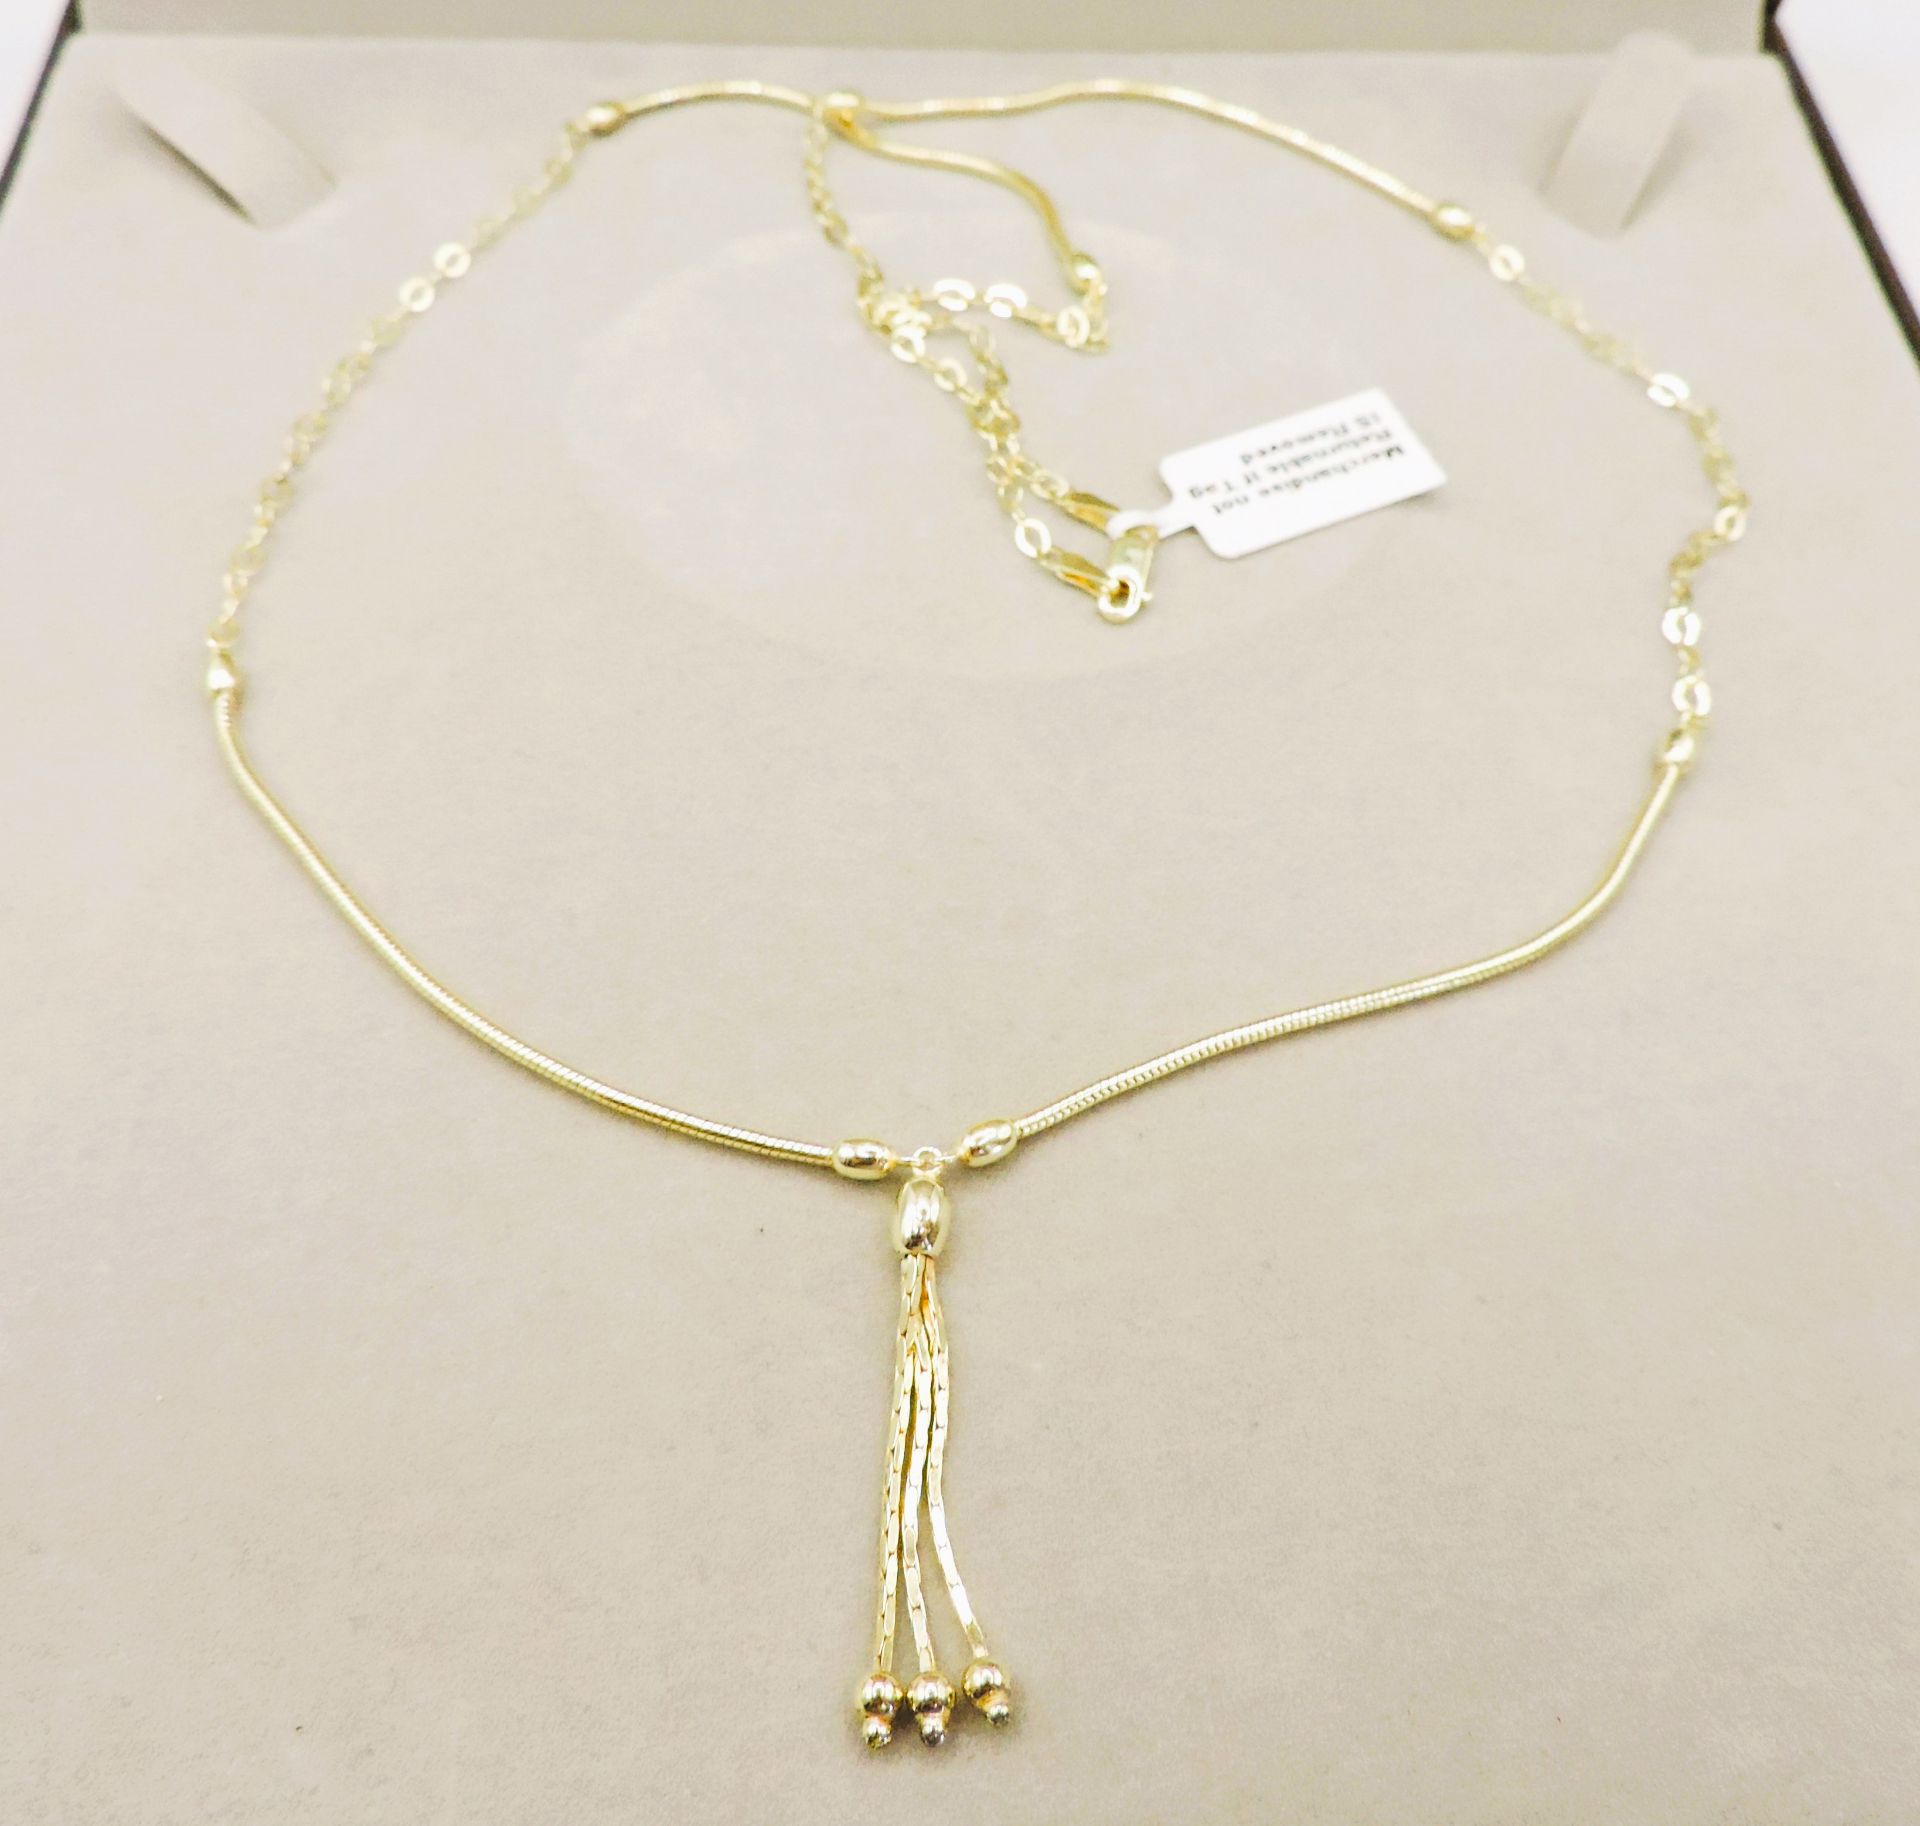 14k Gold on Sterling Silver Necklace New with Gift Box - Image 2 of 4